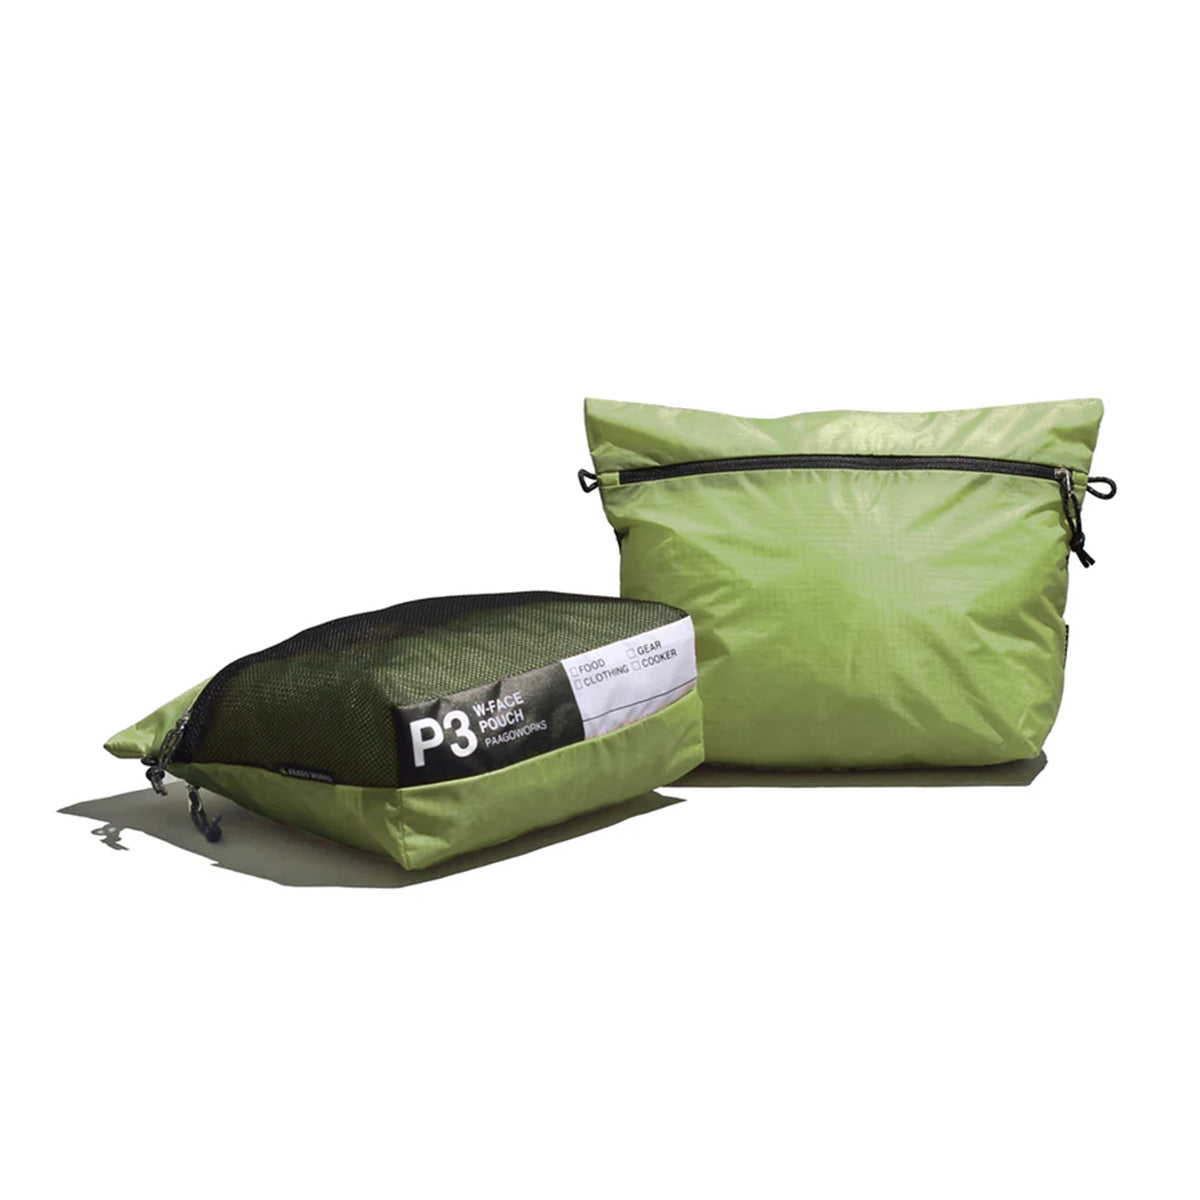 PAAGO WORKS PARGO WORKS W-FACE Pouch 3